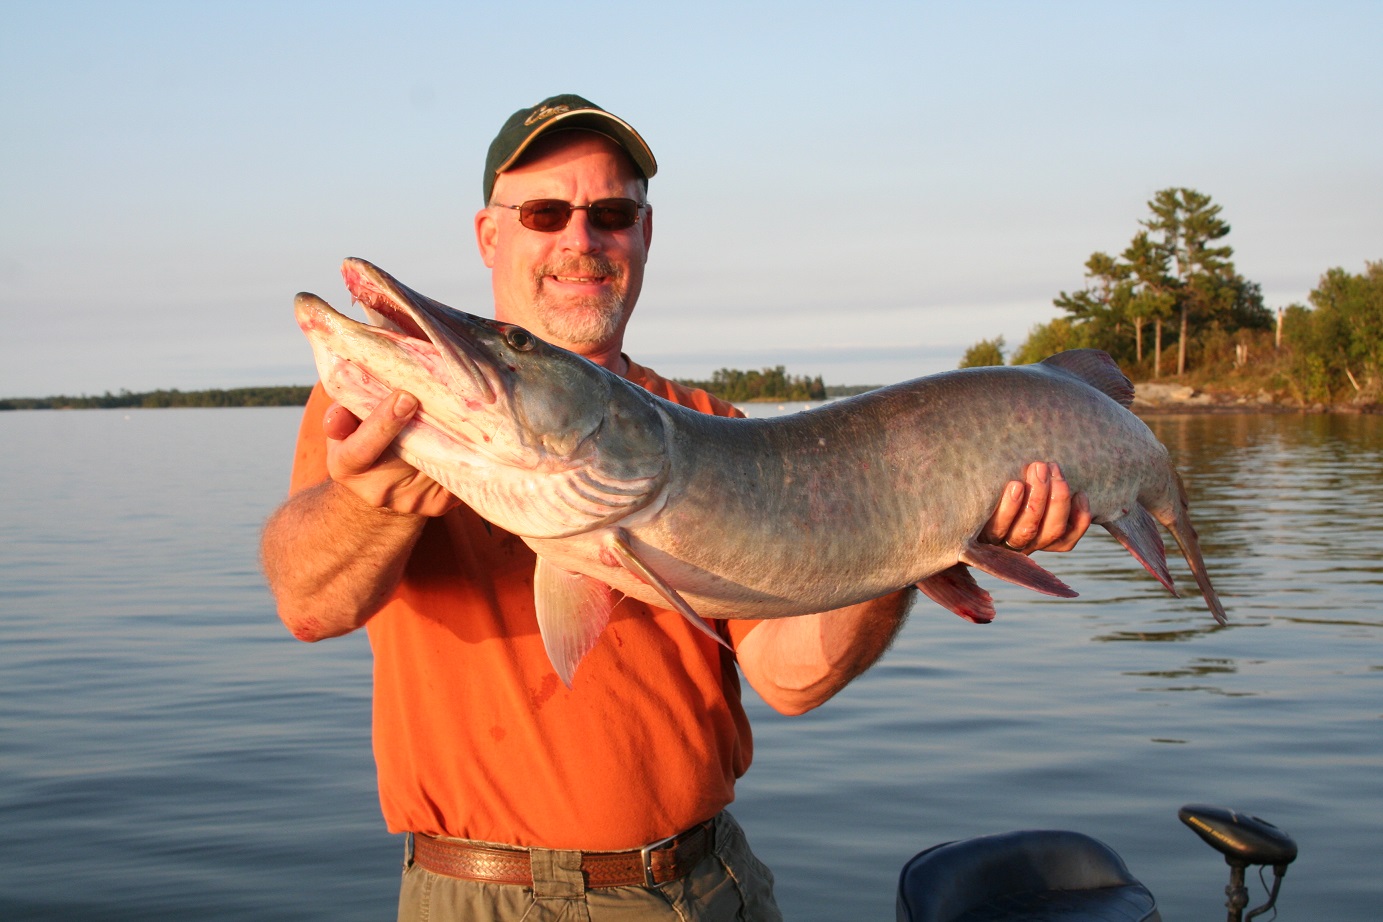 Catch Muskies with the Perfect Figure-8